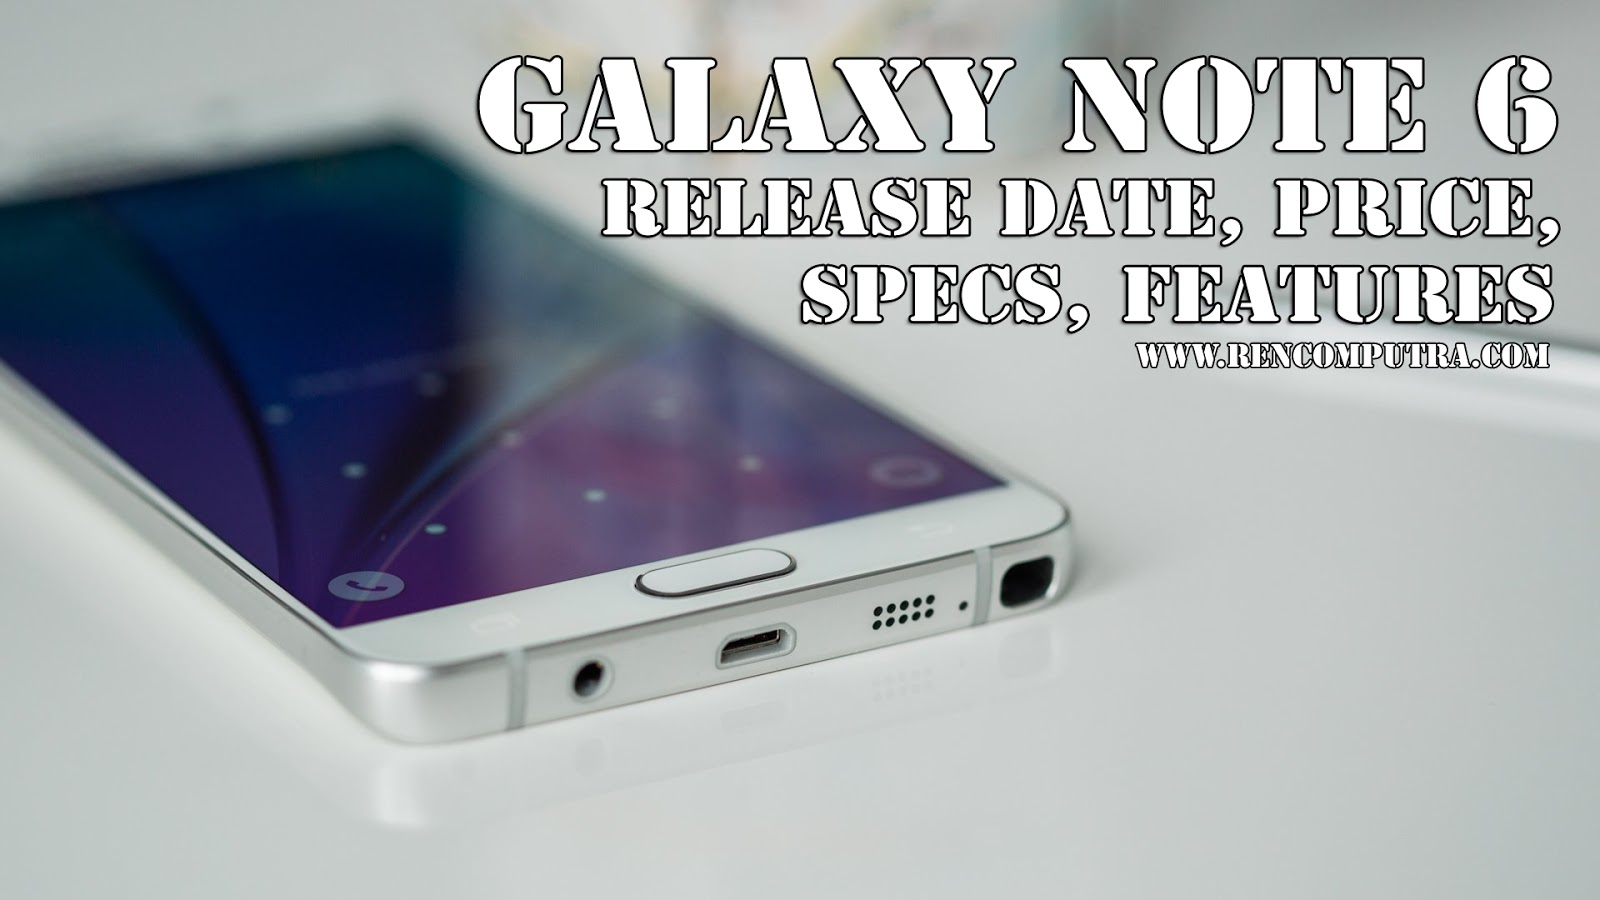 Samsung Galaxy Note 6 release date, price, specs, features